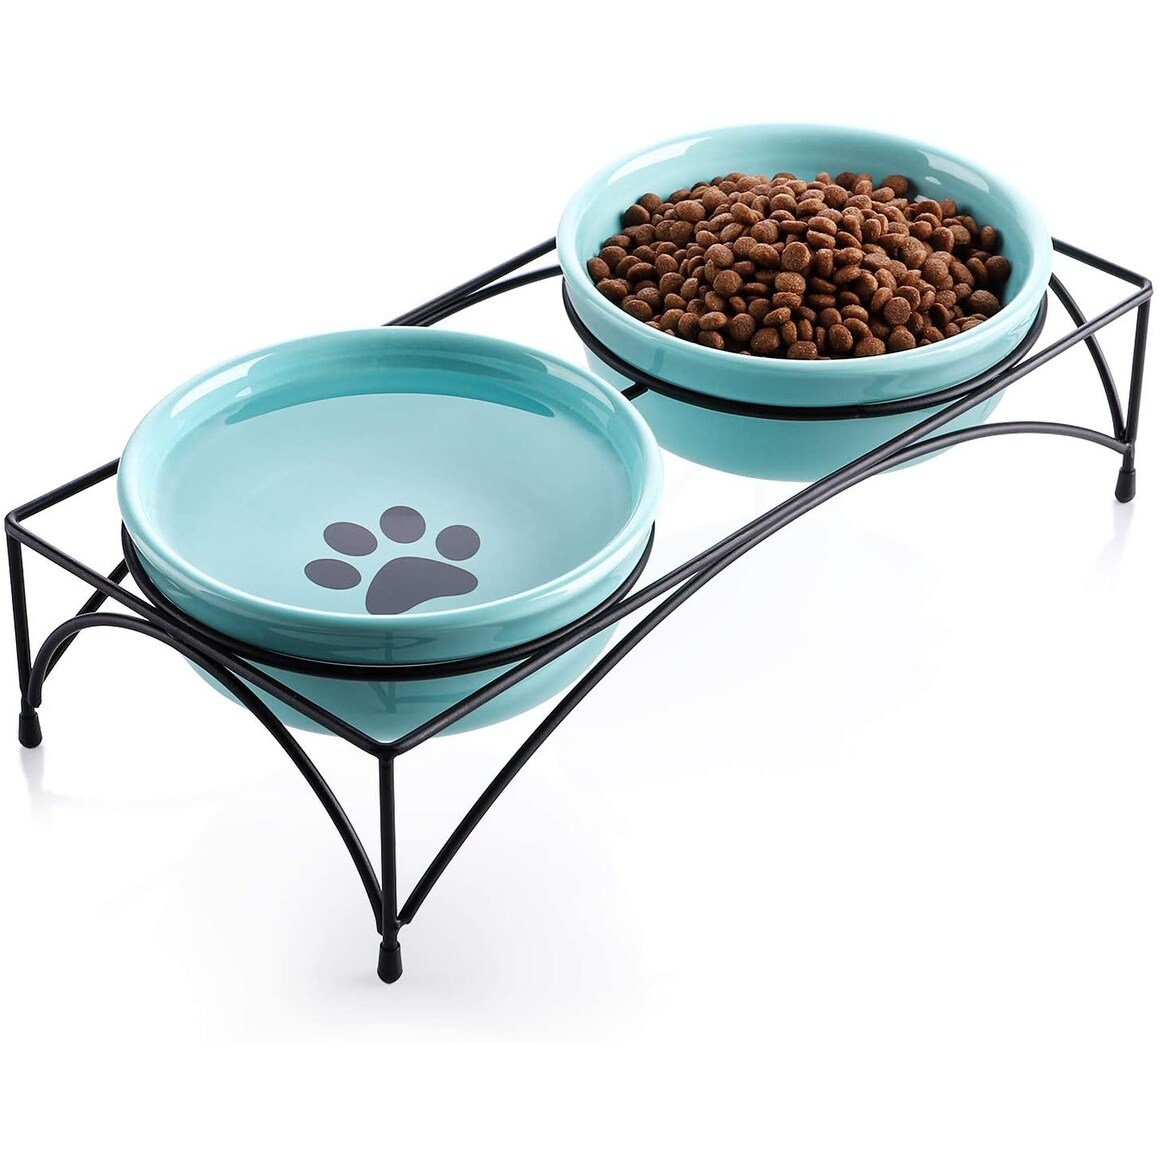 https://ak1.ostkcdn.com/images/products/is/images/direct/c460b84c9c9181dc0e7feb46b0ff23fa5f87f8ef/Y-YHY-Cat-Food-Bowls%2CElevated-Cat-Bowls%2CRaised-Pet-Food-Water-Bowls-with-Stand%2CCeramic-Pet-Bowls-for-Cat-or-Dogs%2C12-Ounces.jpg